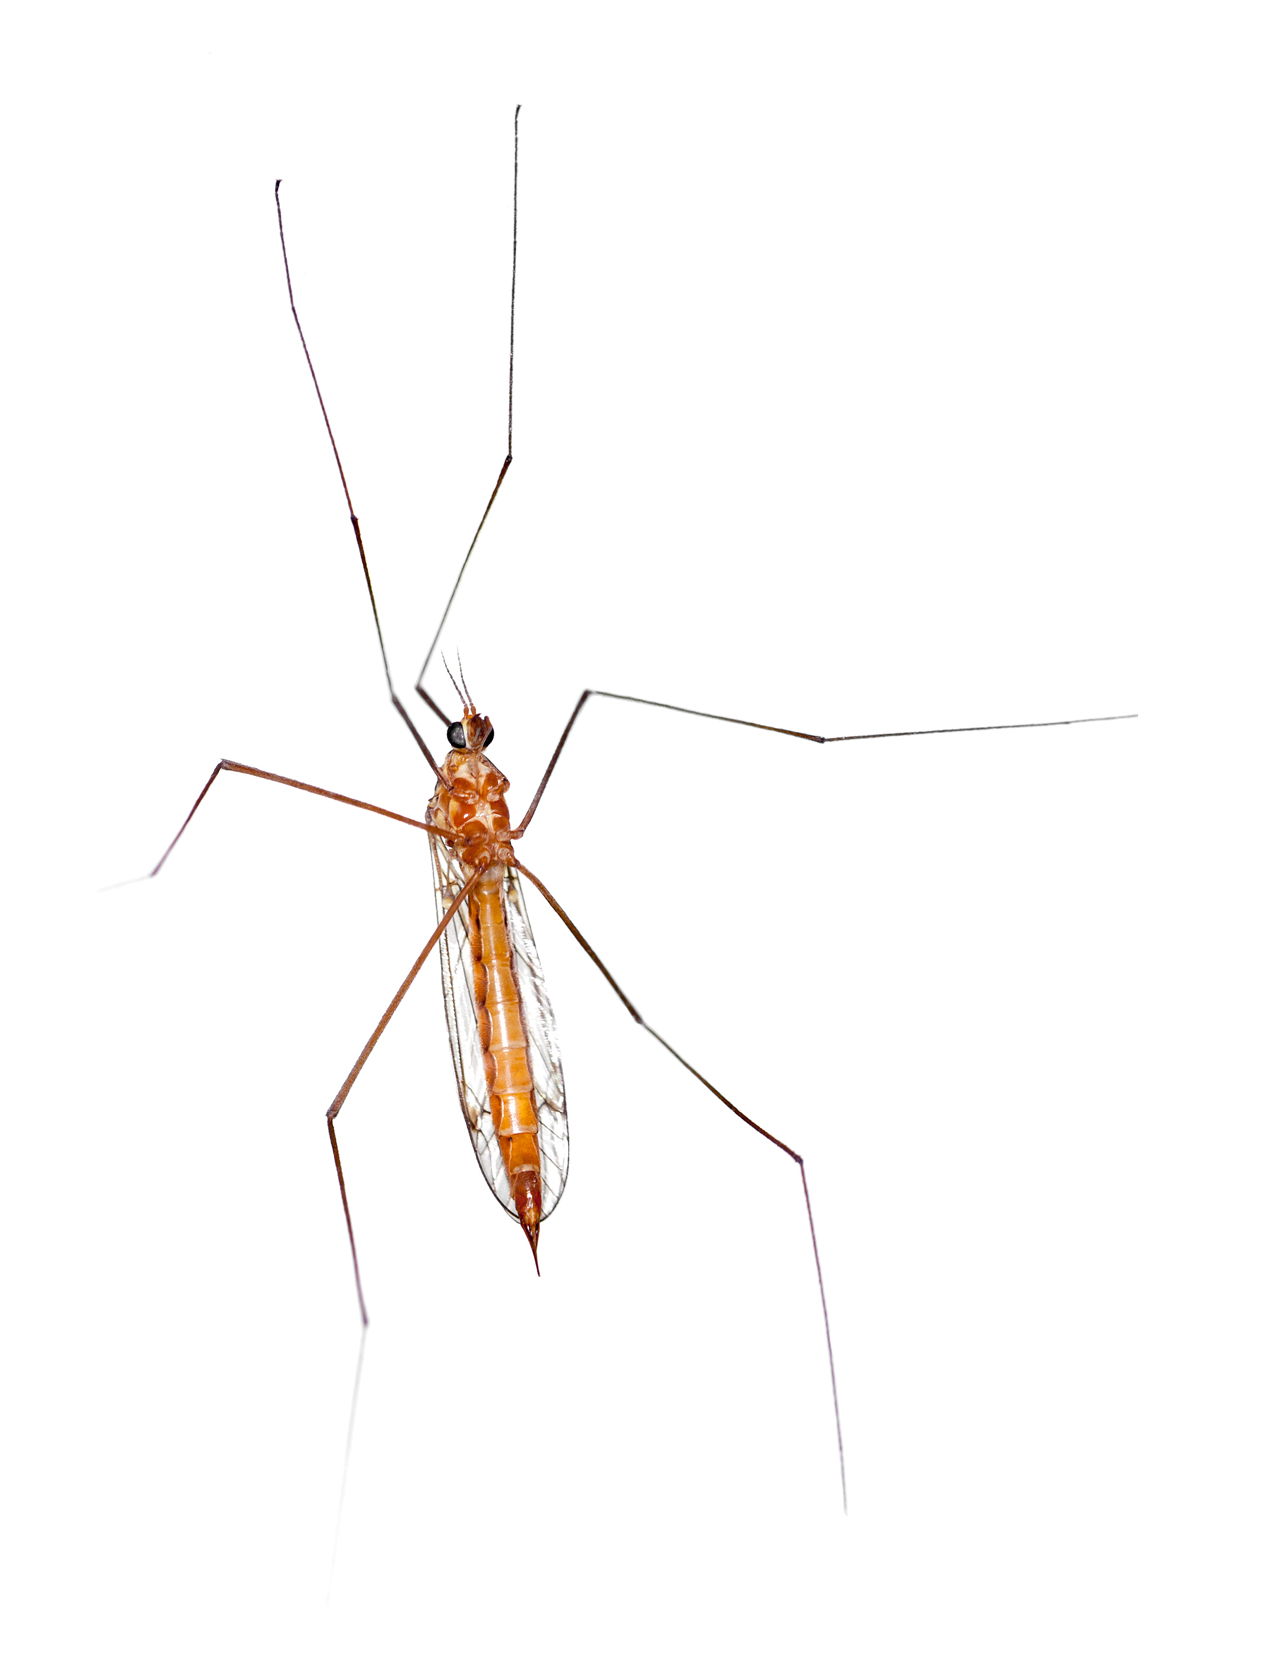 Startling Facts About Daddy Long-legs Spiders